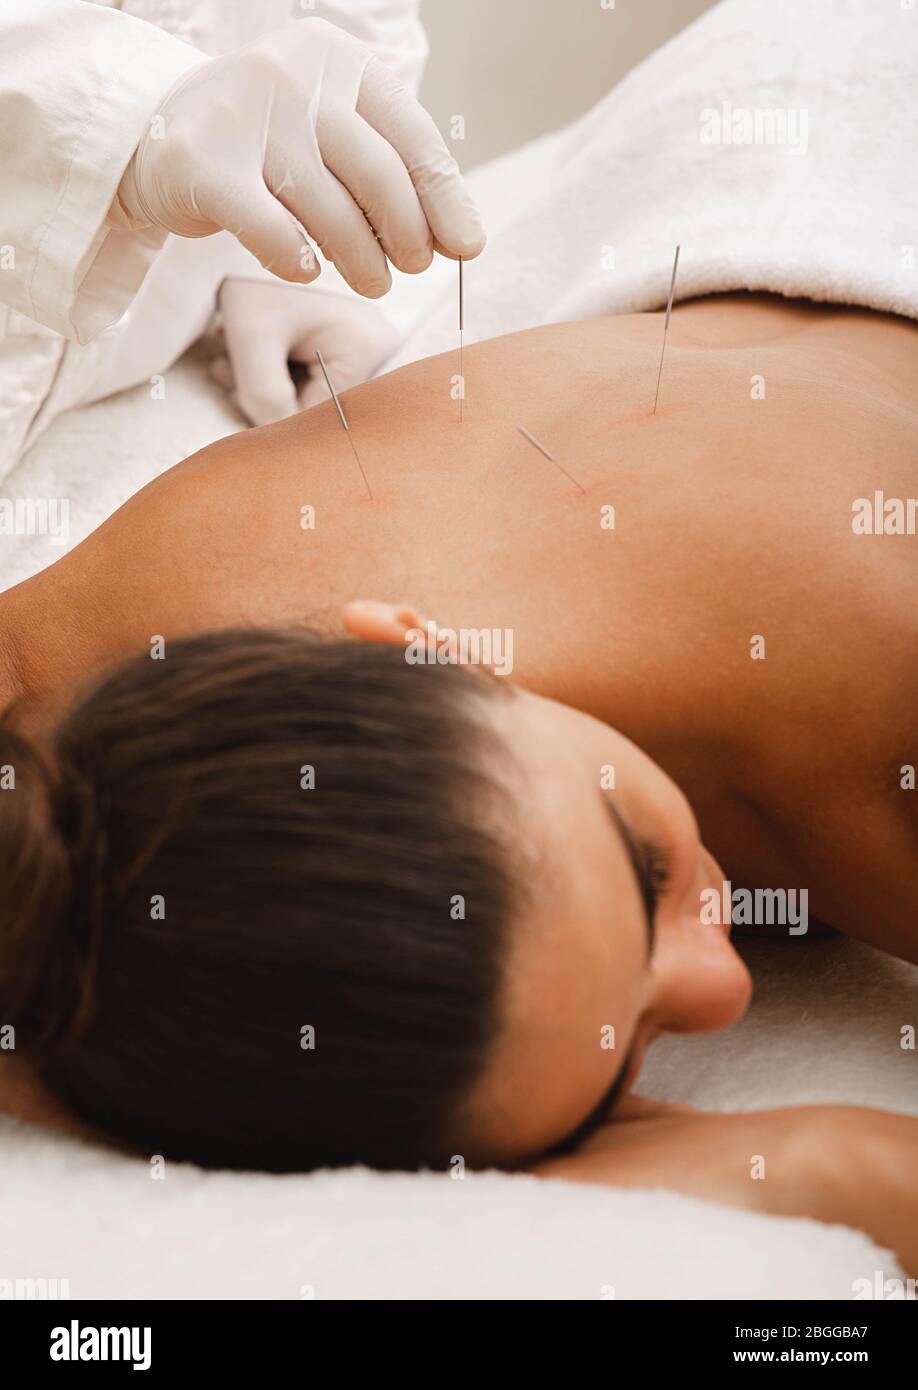 Chronic back pain of a woman is treated with acupuncture. Acupuncturist doing acupuncture very precisely at special points on his back Stock Photo